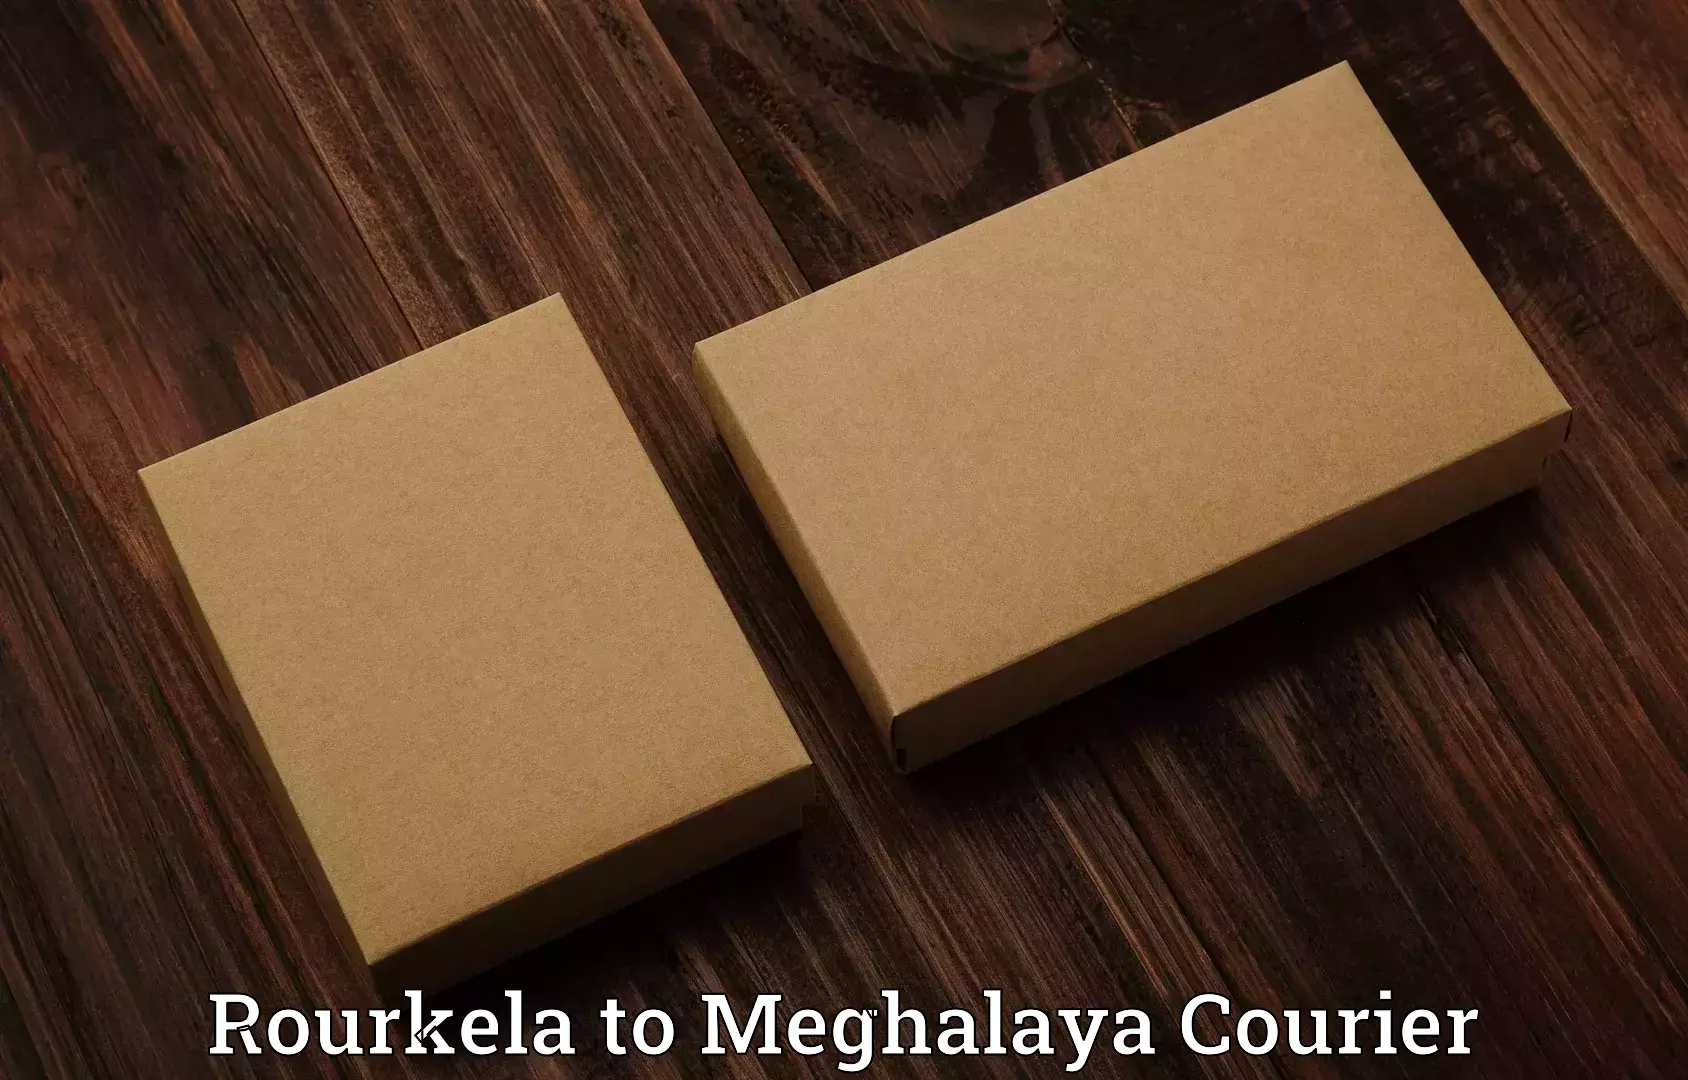 Luggage delivery network Rourkela to Tura